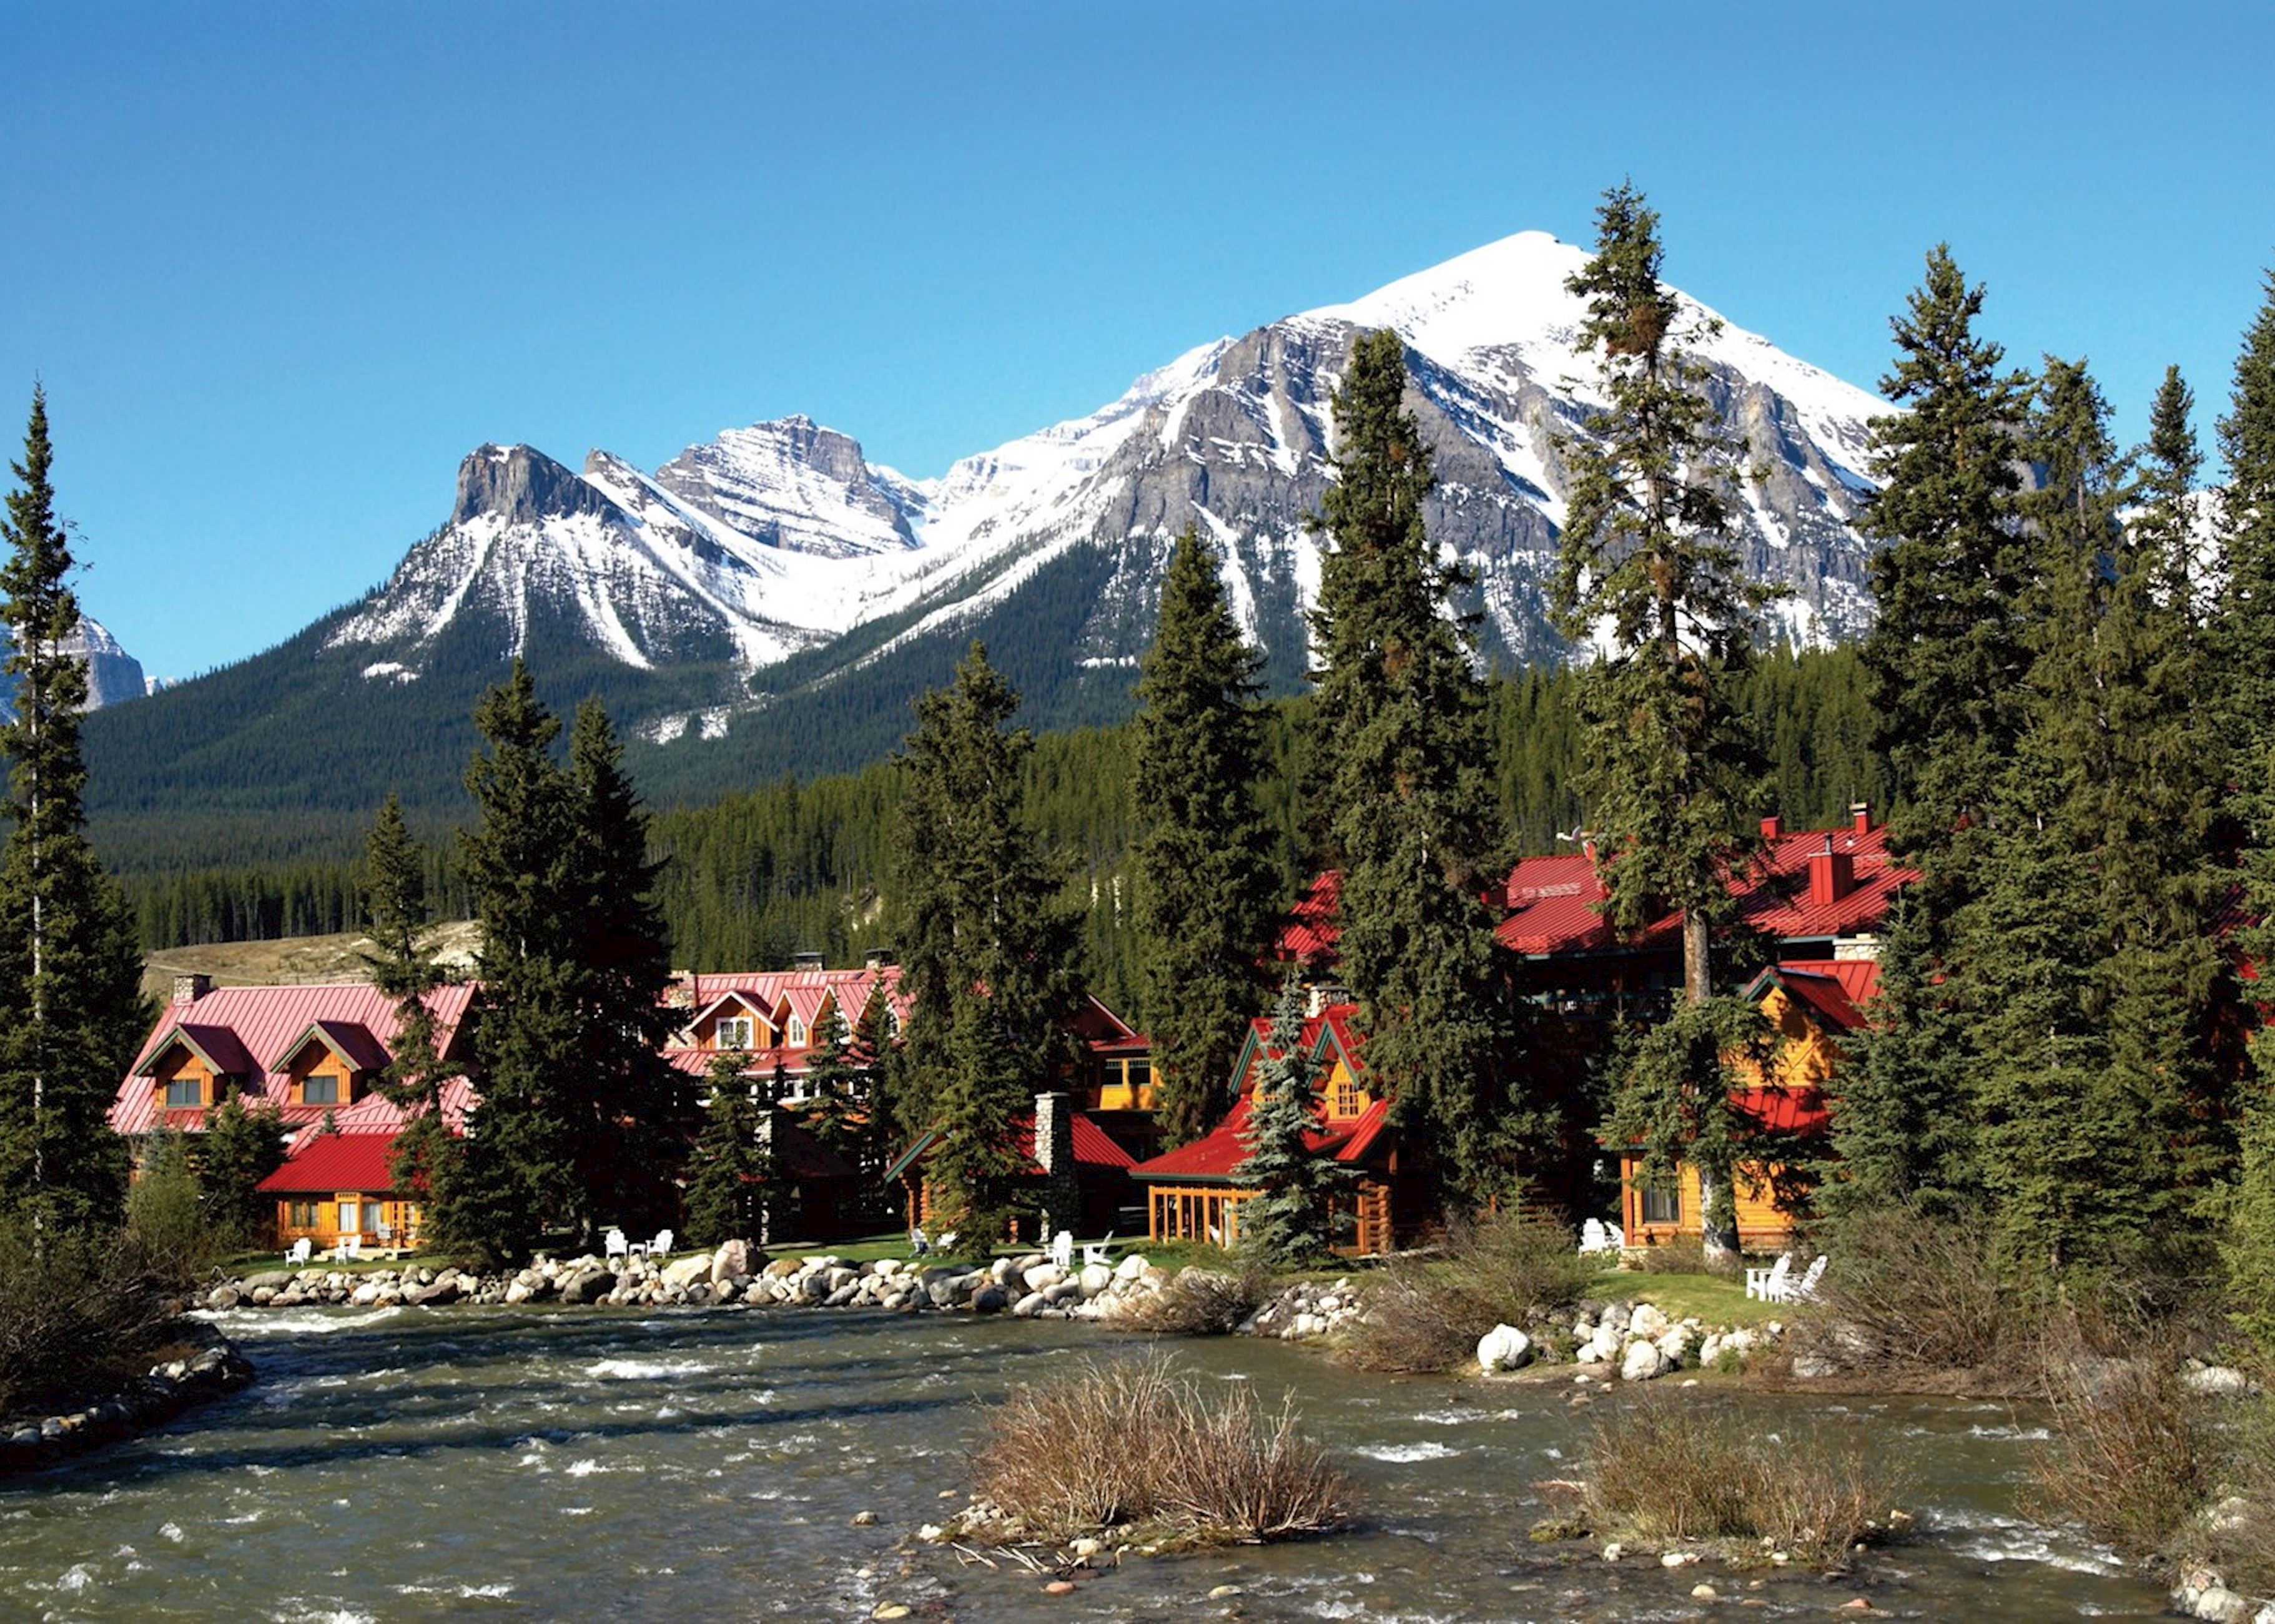 Post Hotel Dining Room Lake Louise Reviews